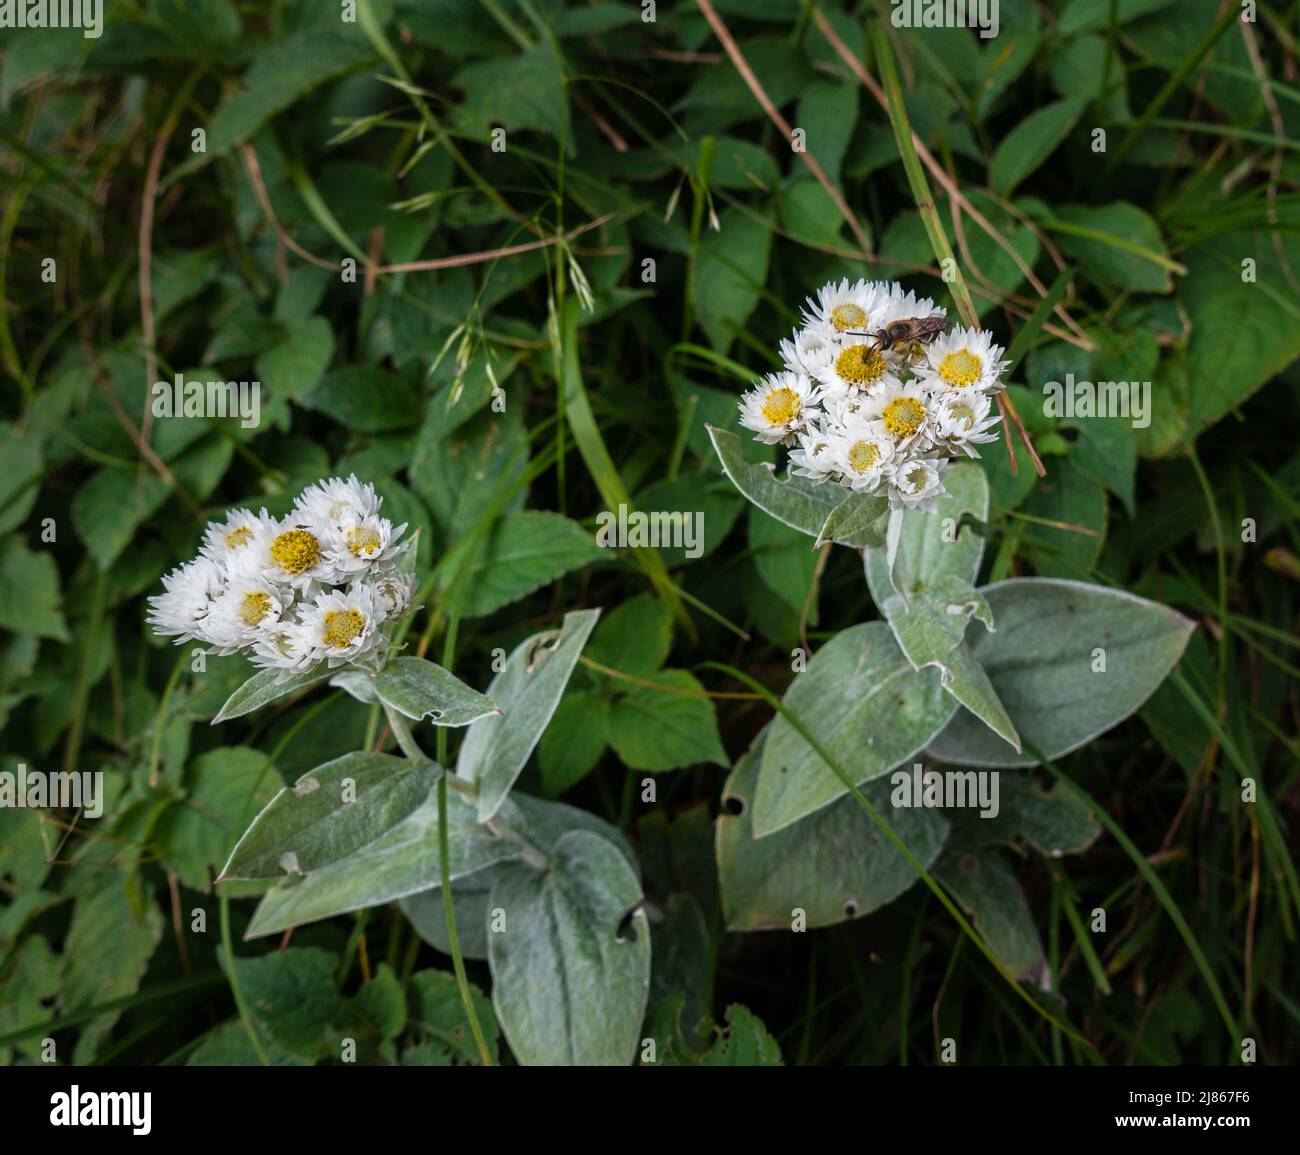 A pair of western pearly everlasting flowers growing in natural surrounding in an Indian forest. Anaphalis Margaritacea Stock Photo